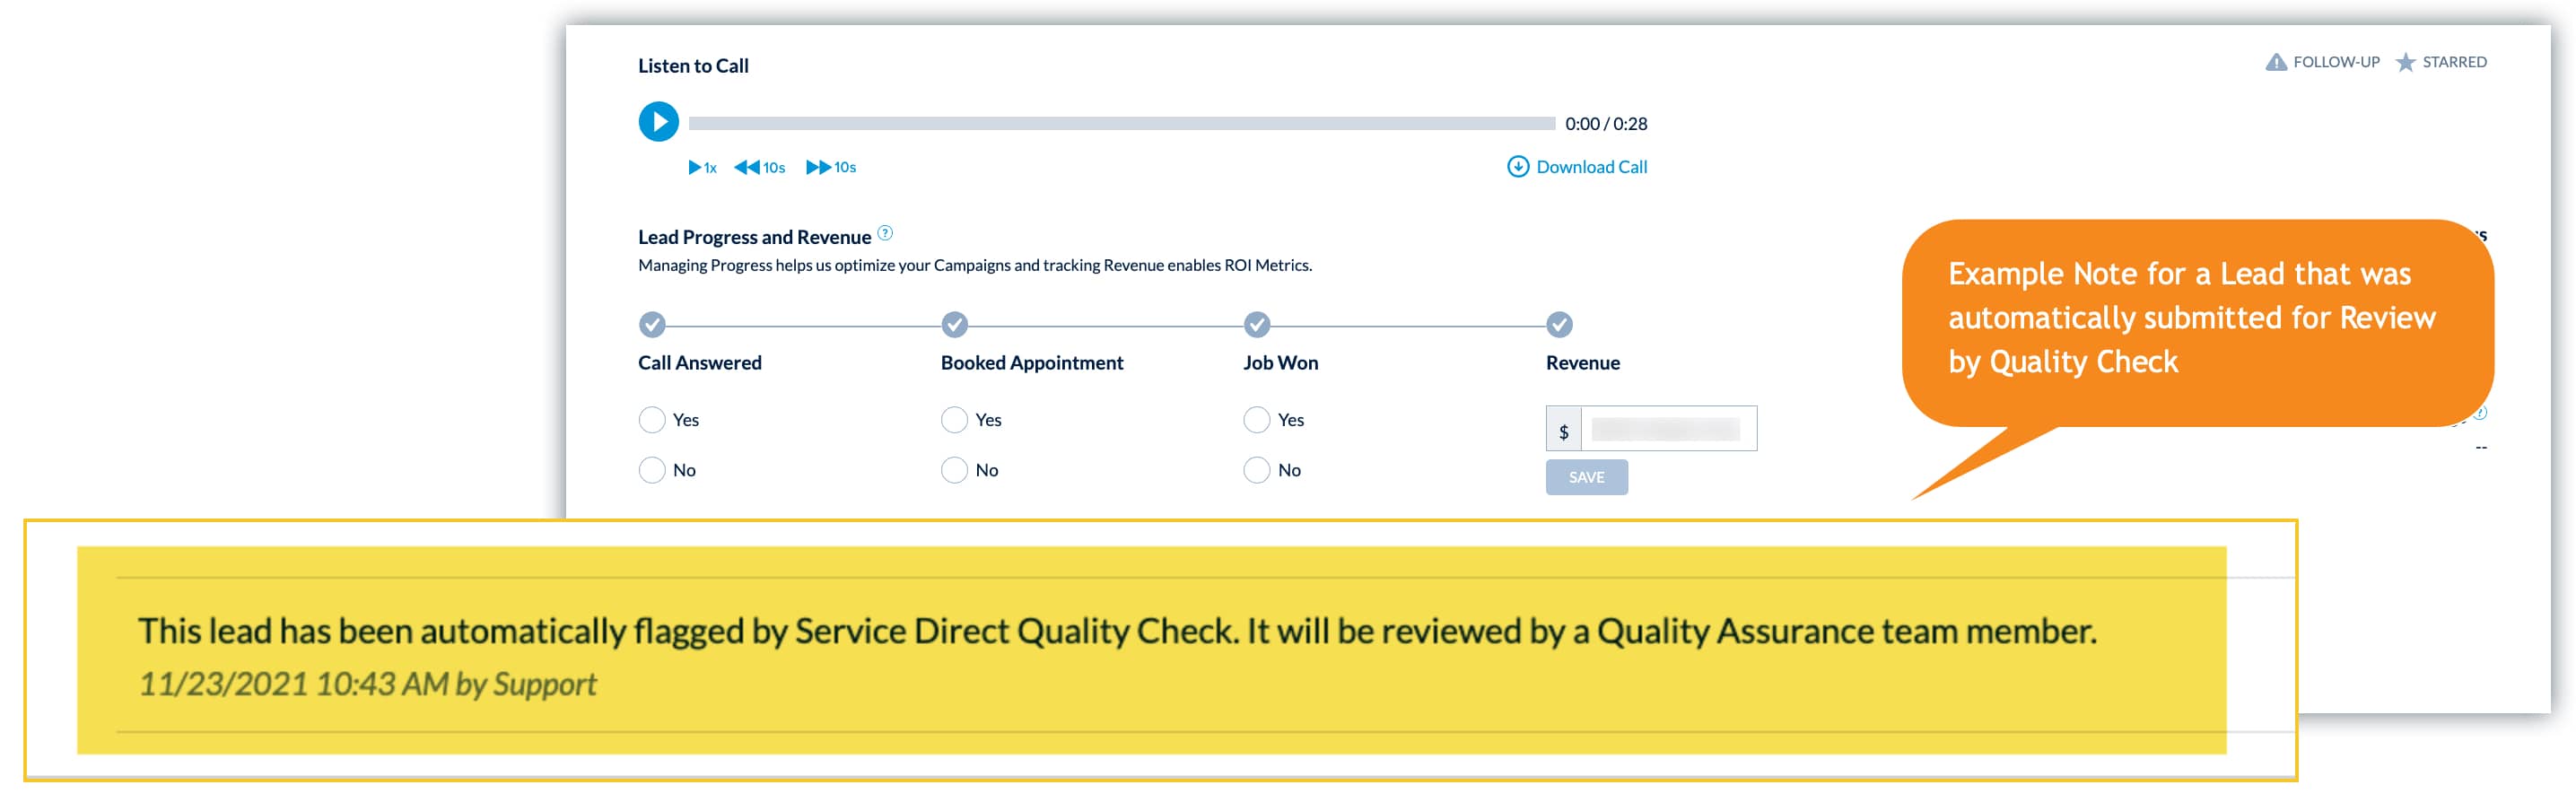 Example Note From Quality Check in mySD Leads Manager V2